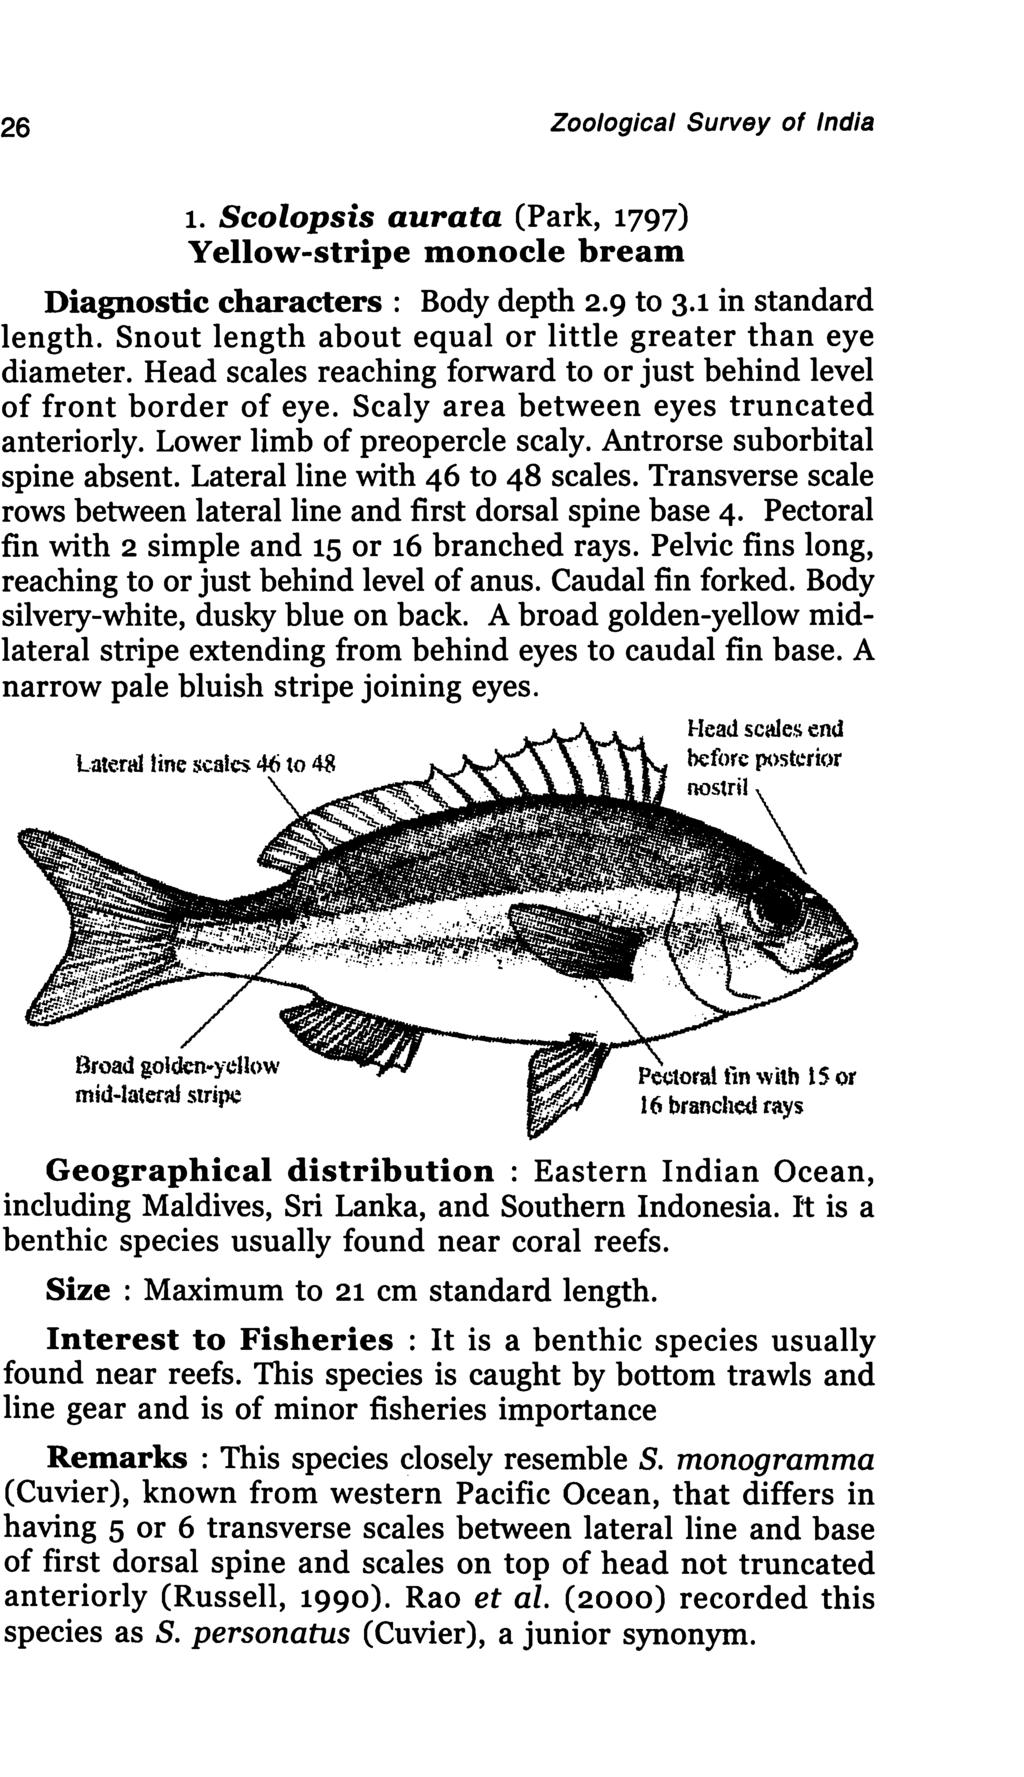 26 Zoological Survey of India 1. Scolopsis aurata (Park, 1797) Yellow-stripe monocle bream Diagnostic characters: Body depth 2.9 to 3.1 in standard length.